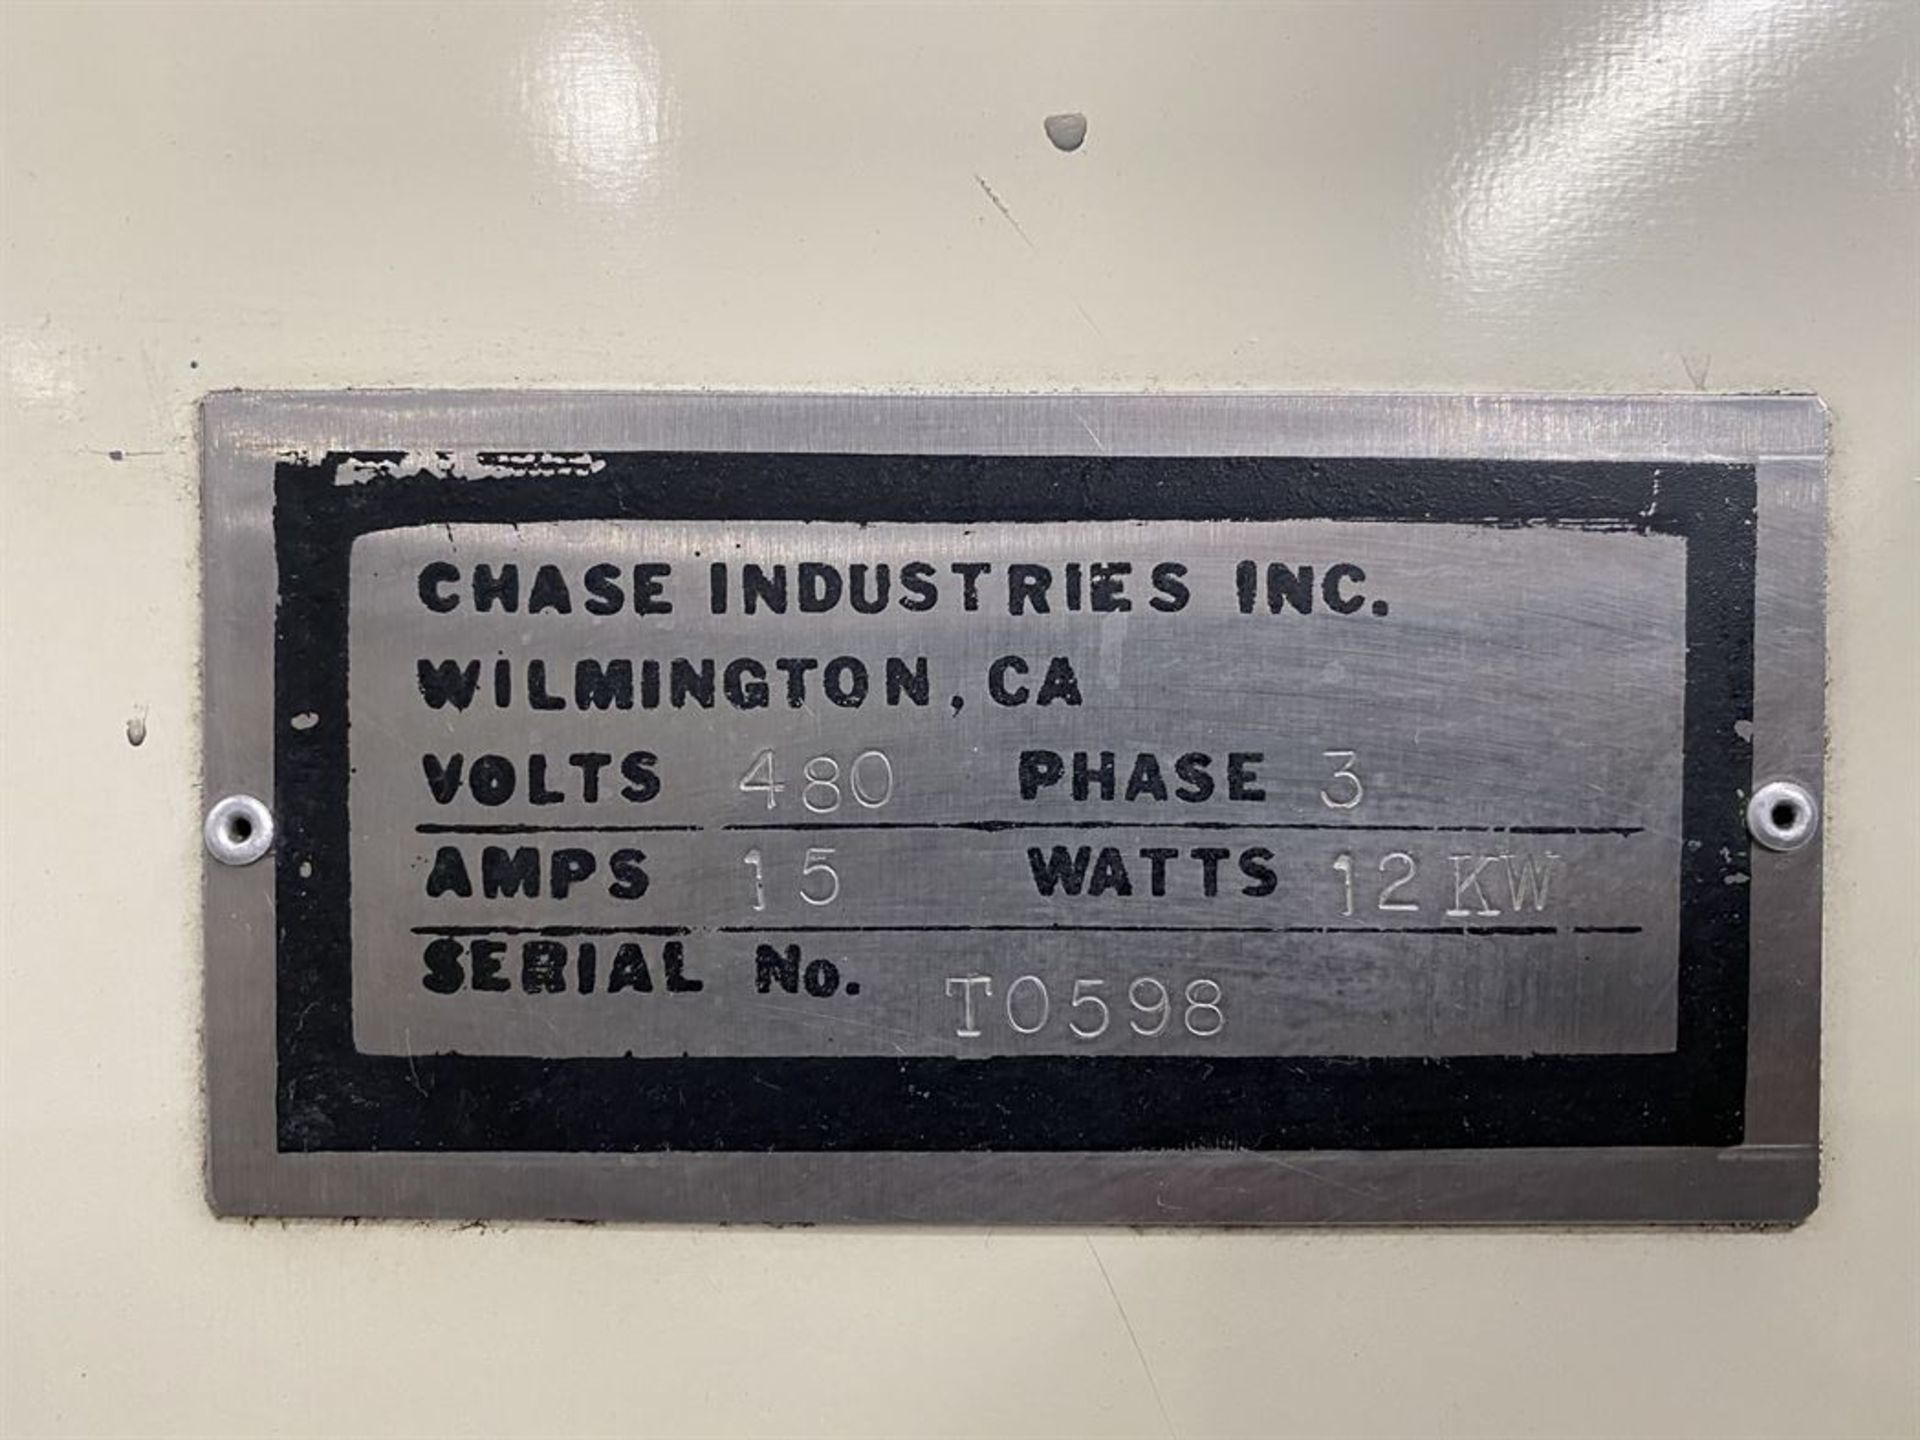 Chase Industries Heat Shrink Line, s/n T0598, 12kW - Image 5 of 6